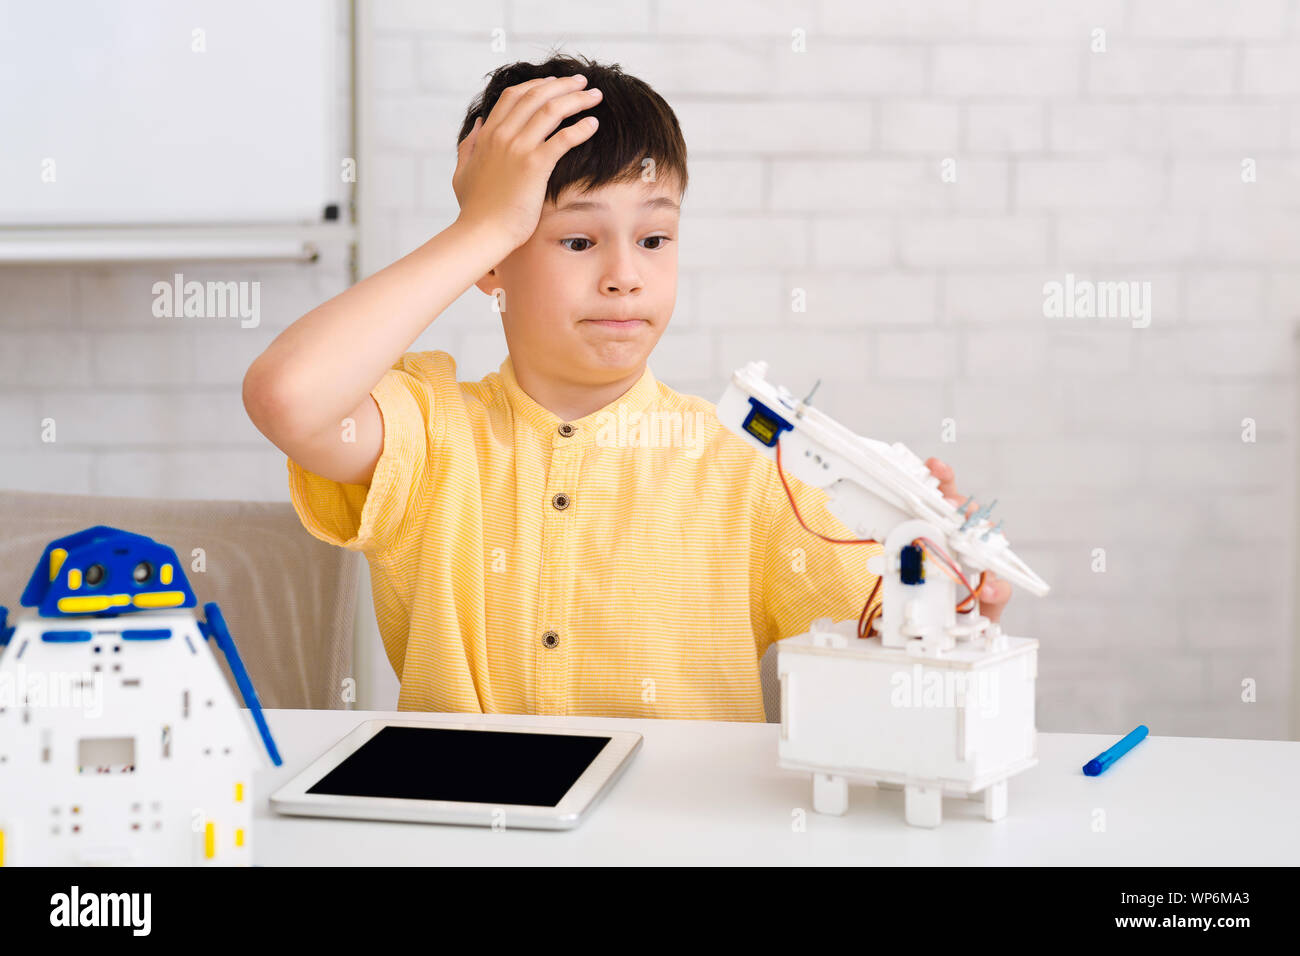 Stem education. Dismayed boy creating robot and made mistake Stock Photo